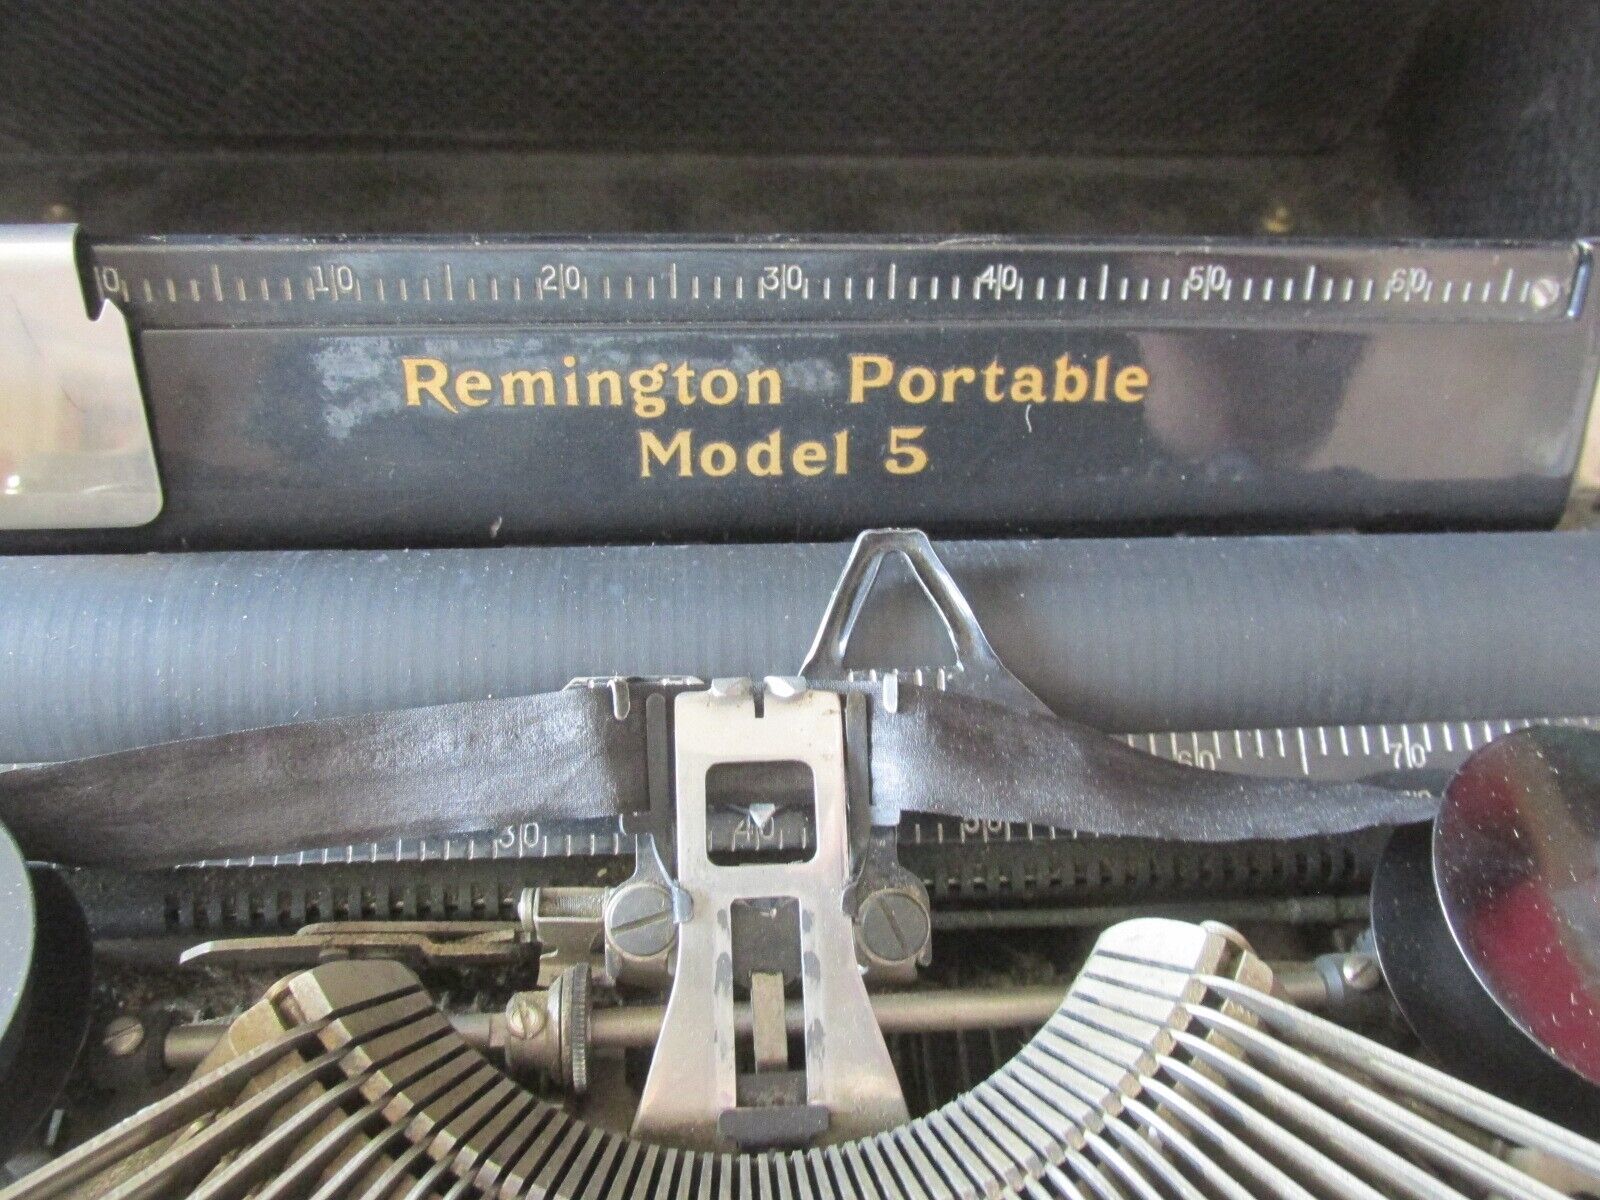 1930’s Remington Portable Model 5 - Antique Typewriter - With Case Works